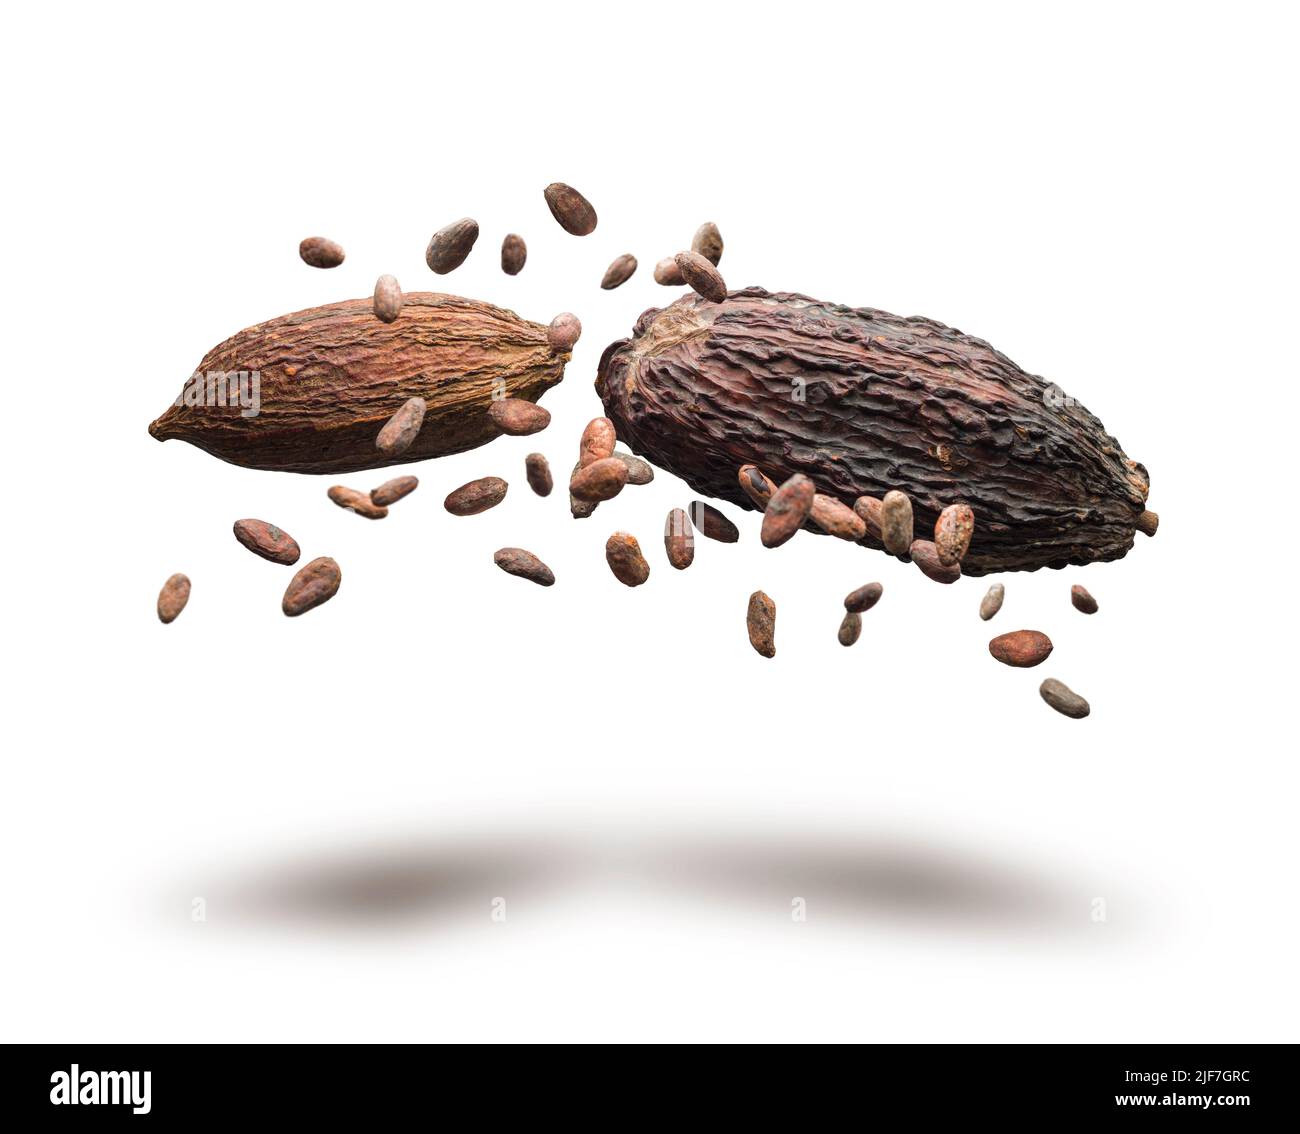 Cocoa pods and beans jumping on white background Stock Photo